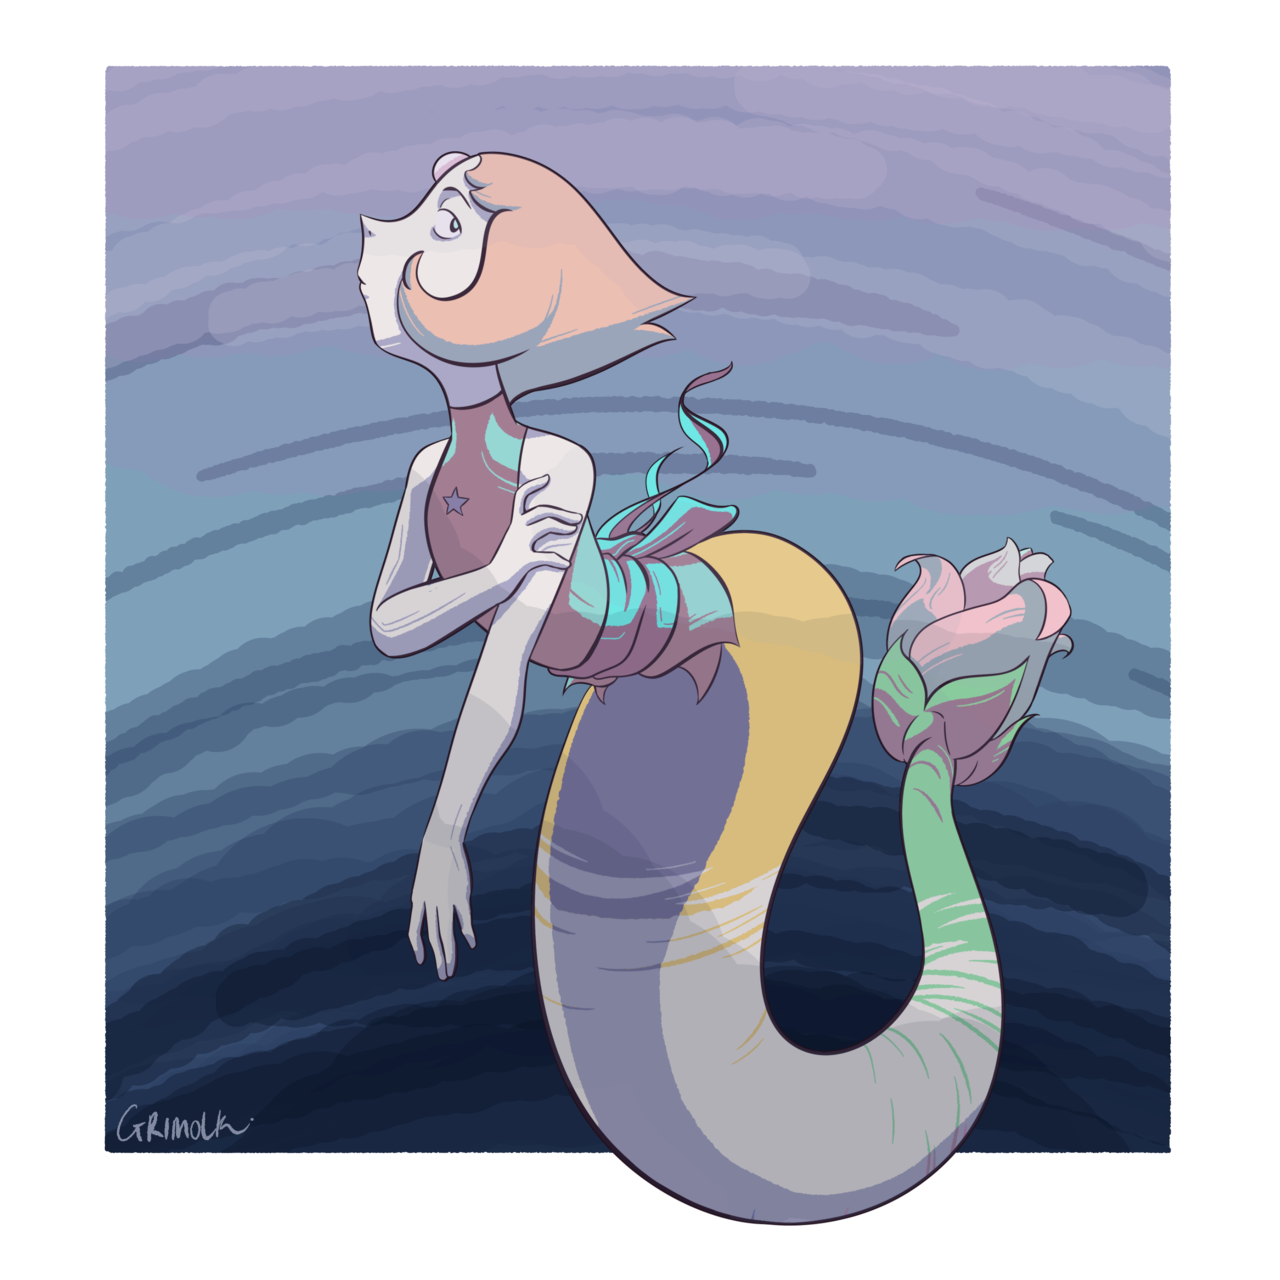 Pearl mermaid I loved drawing this and experimenting with the weirdly coloured shading!